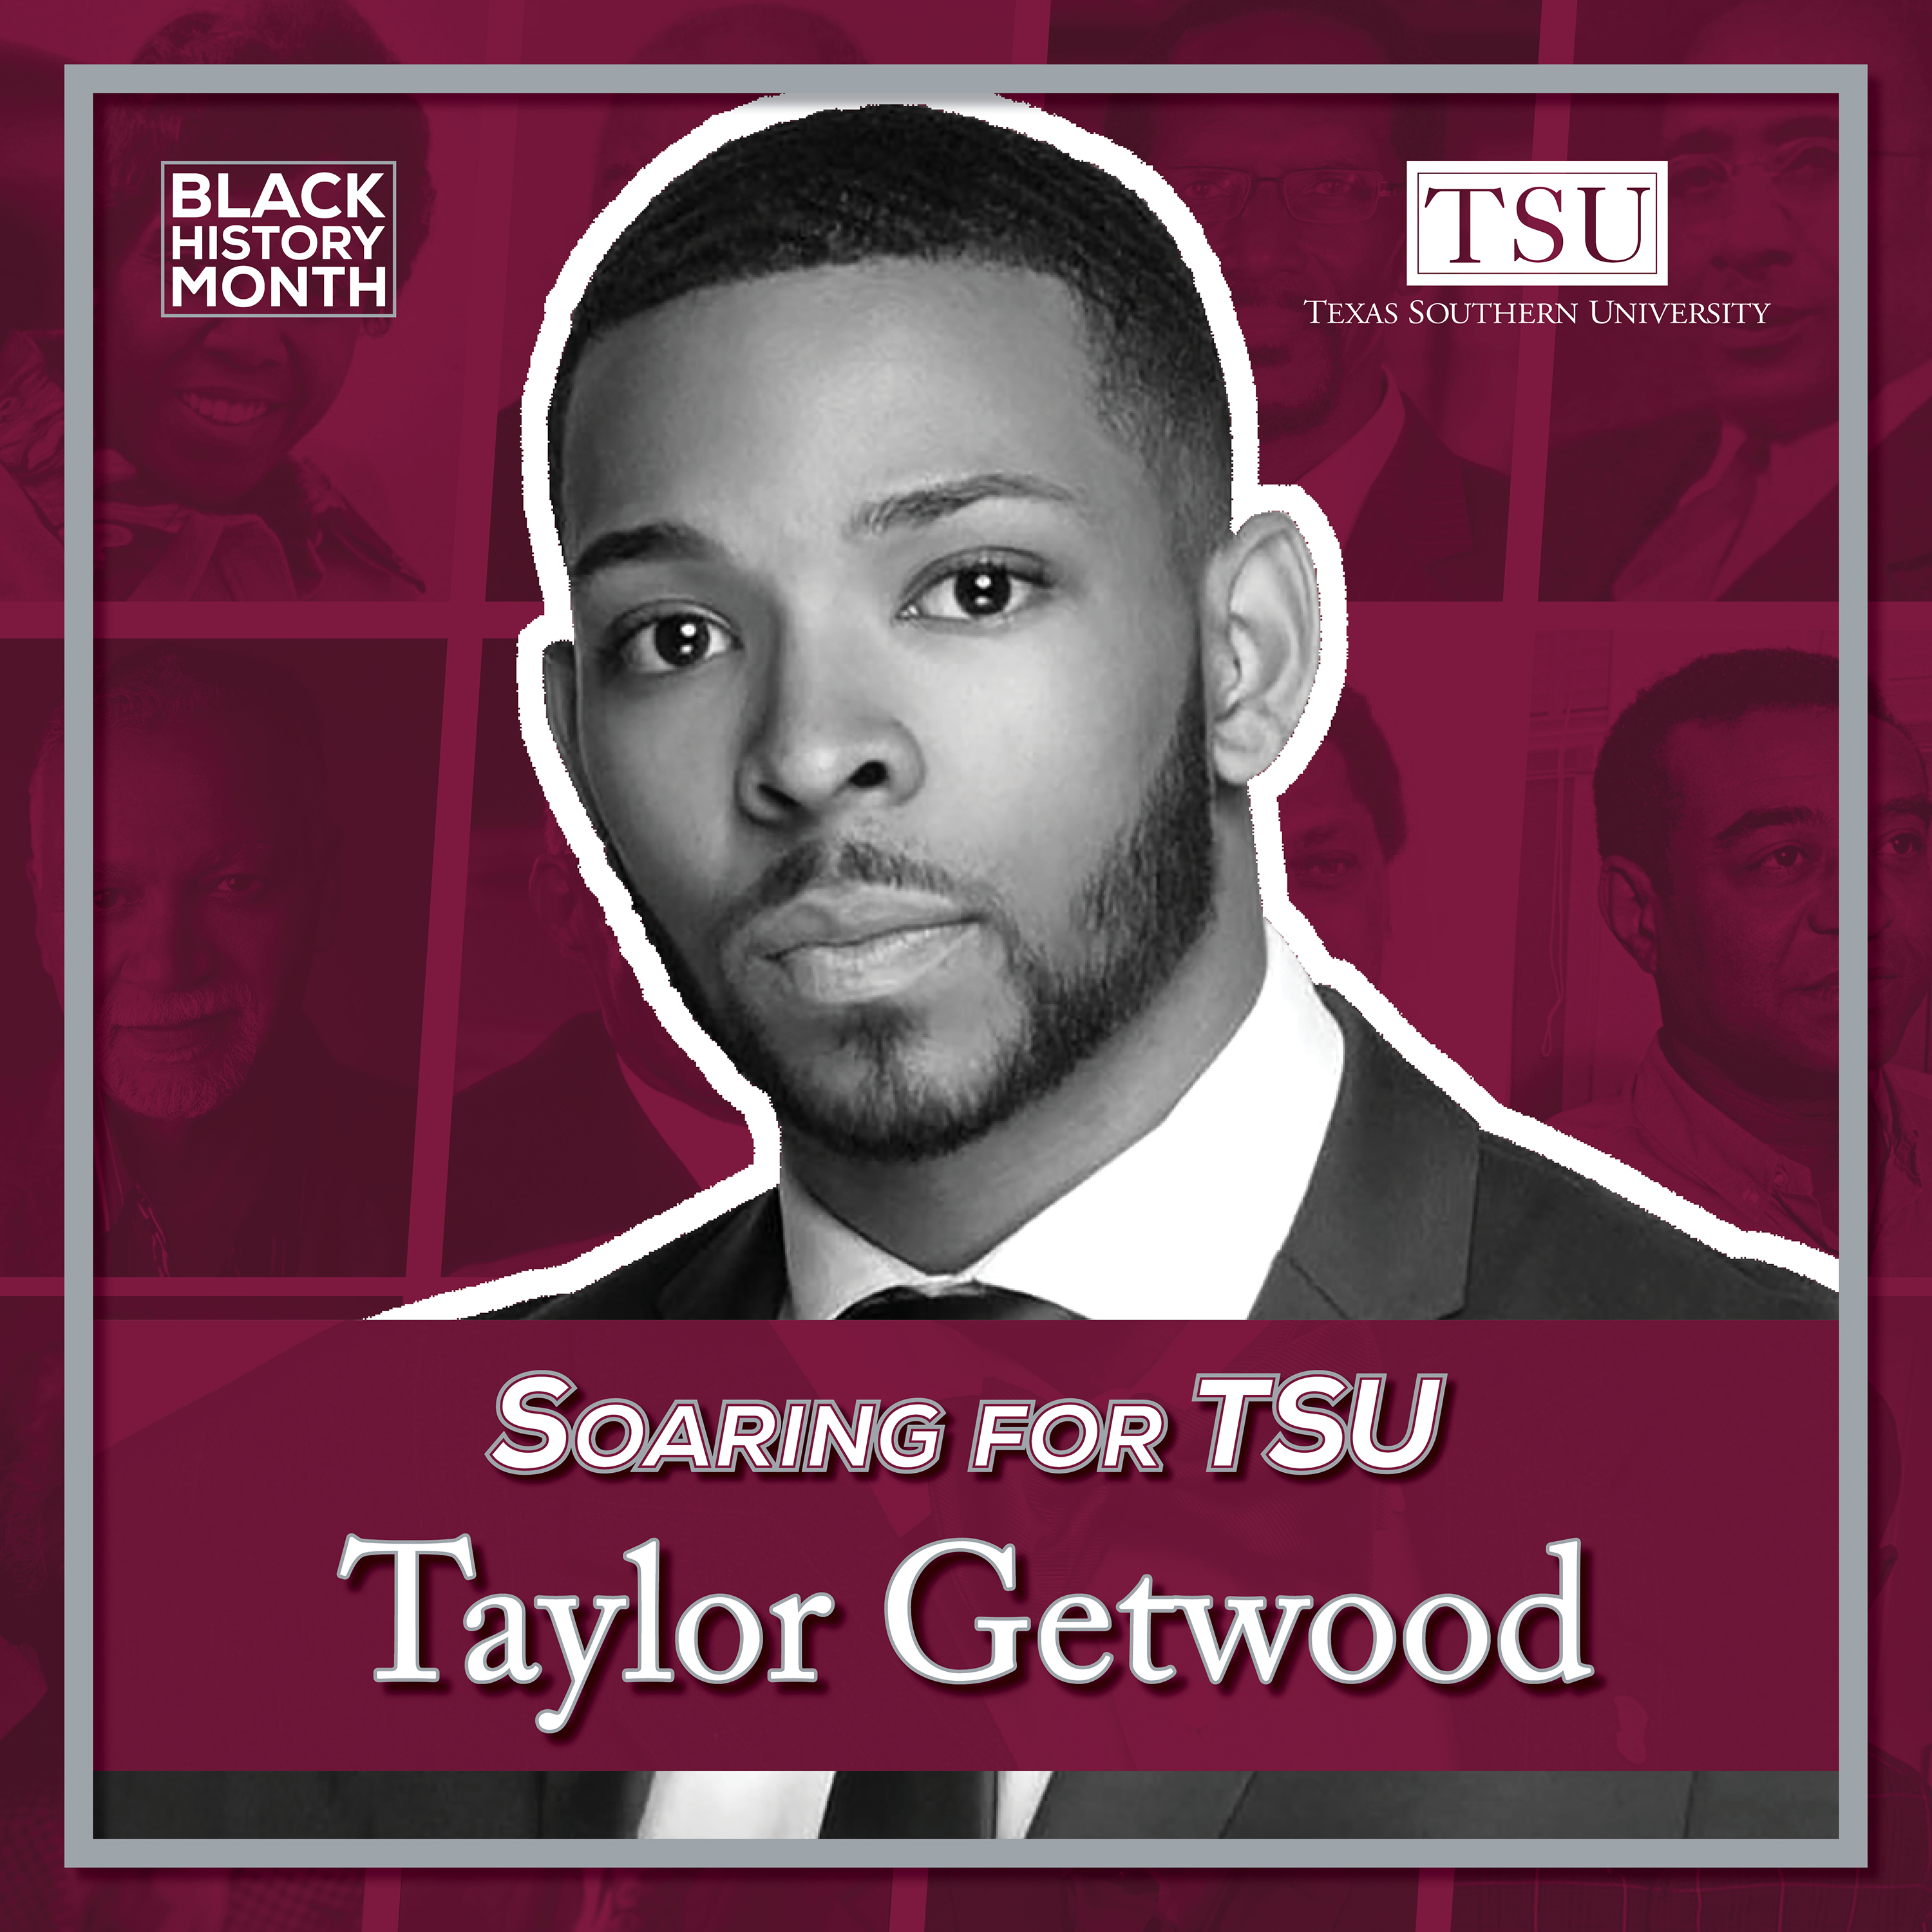 Taylor Getwood